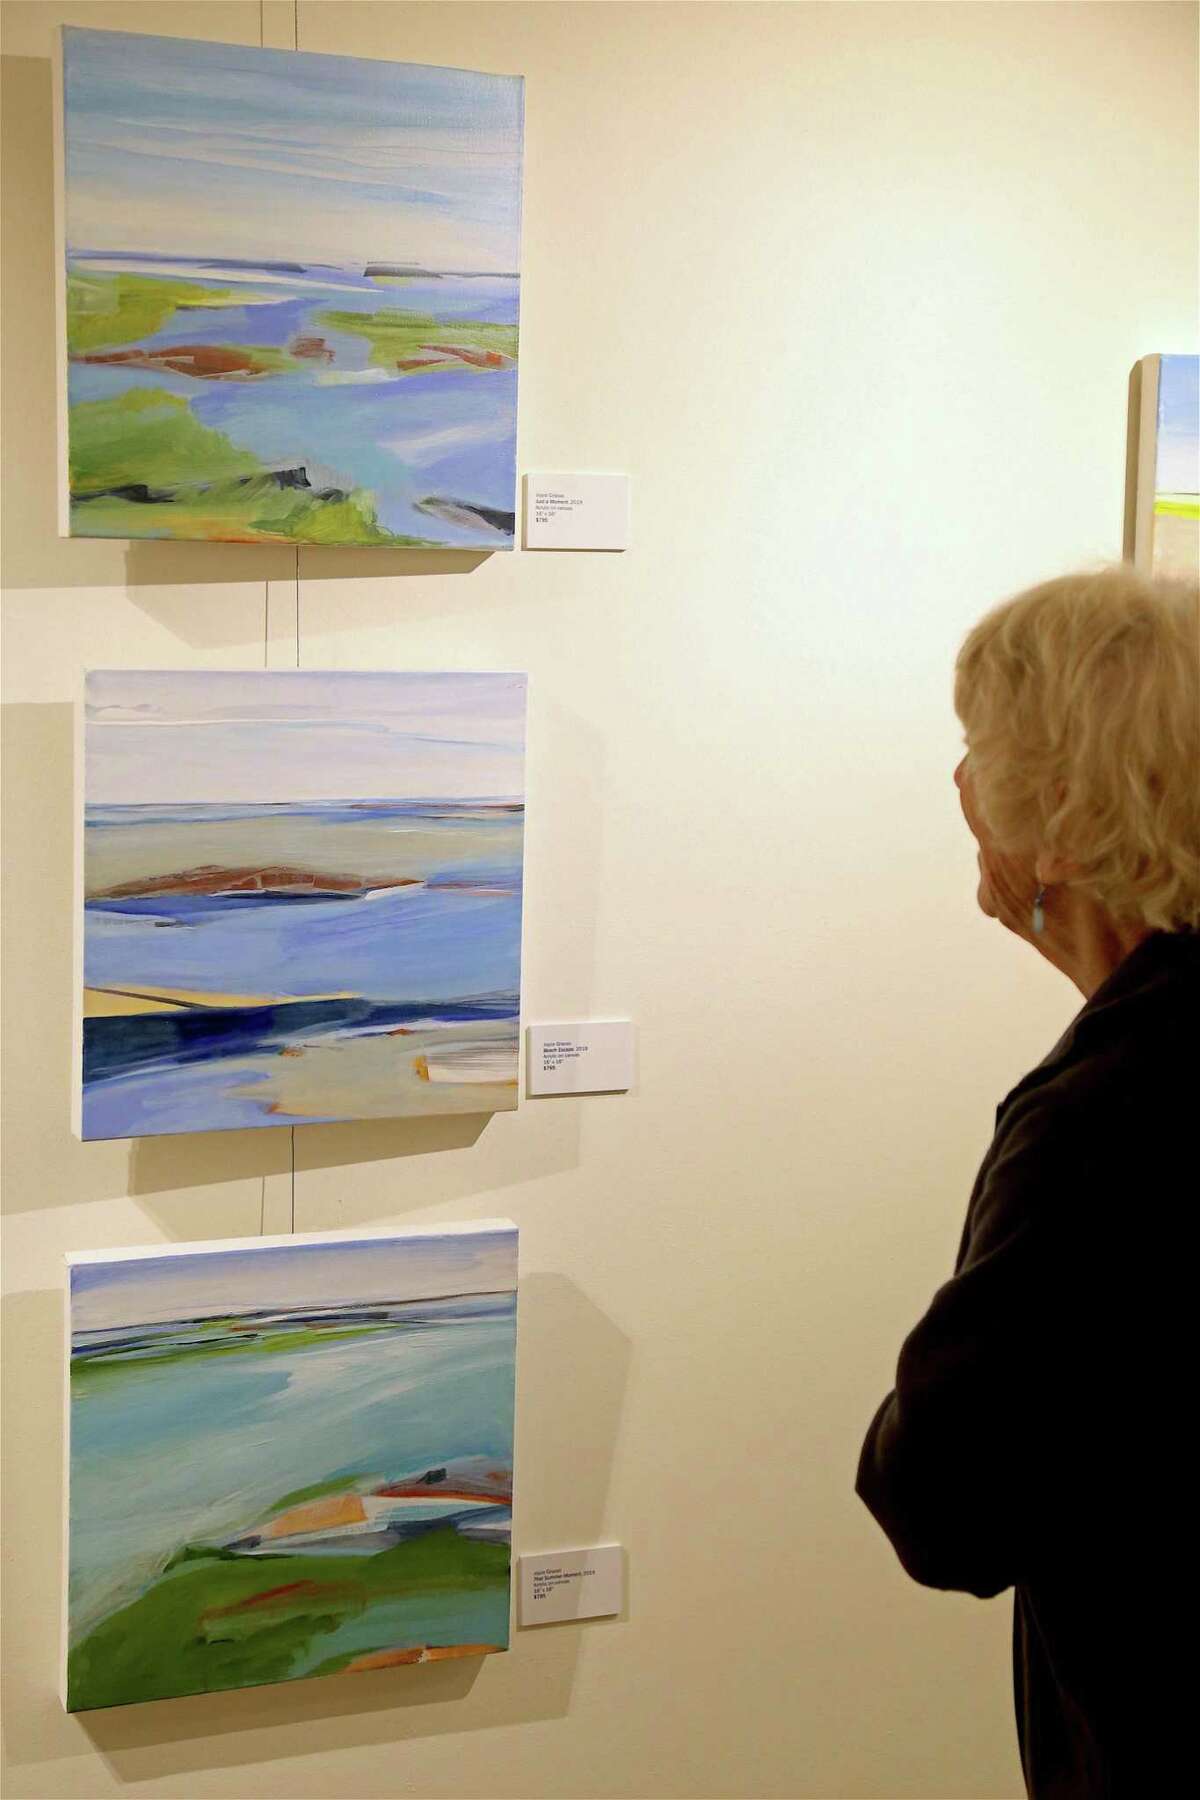 Jane Bowler of Fairfield studies some work at the opening reception for the art show "Coastal Expressions" by Joyce Grasso at the Pequot Library on Thursday, Sept. 5, 2019, in Fairfield, Conn.